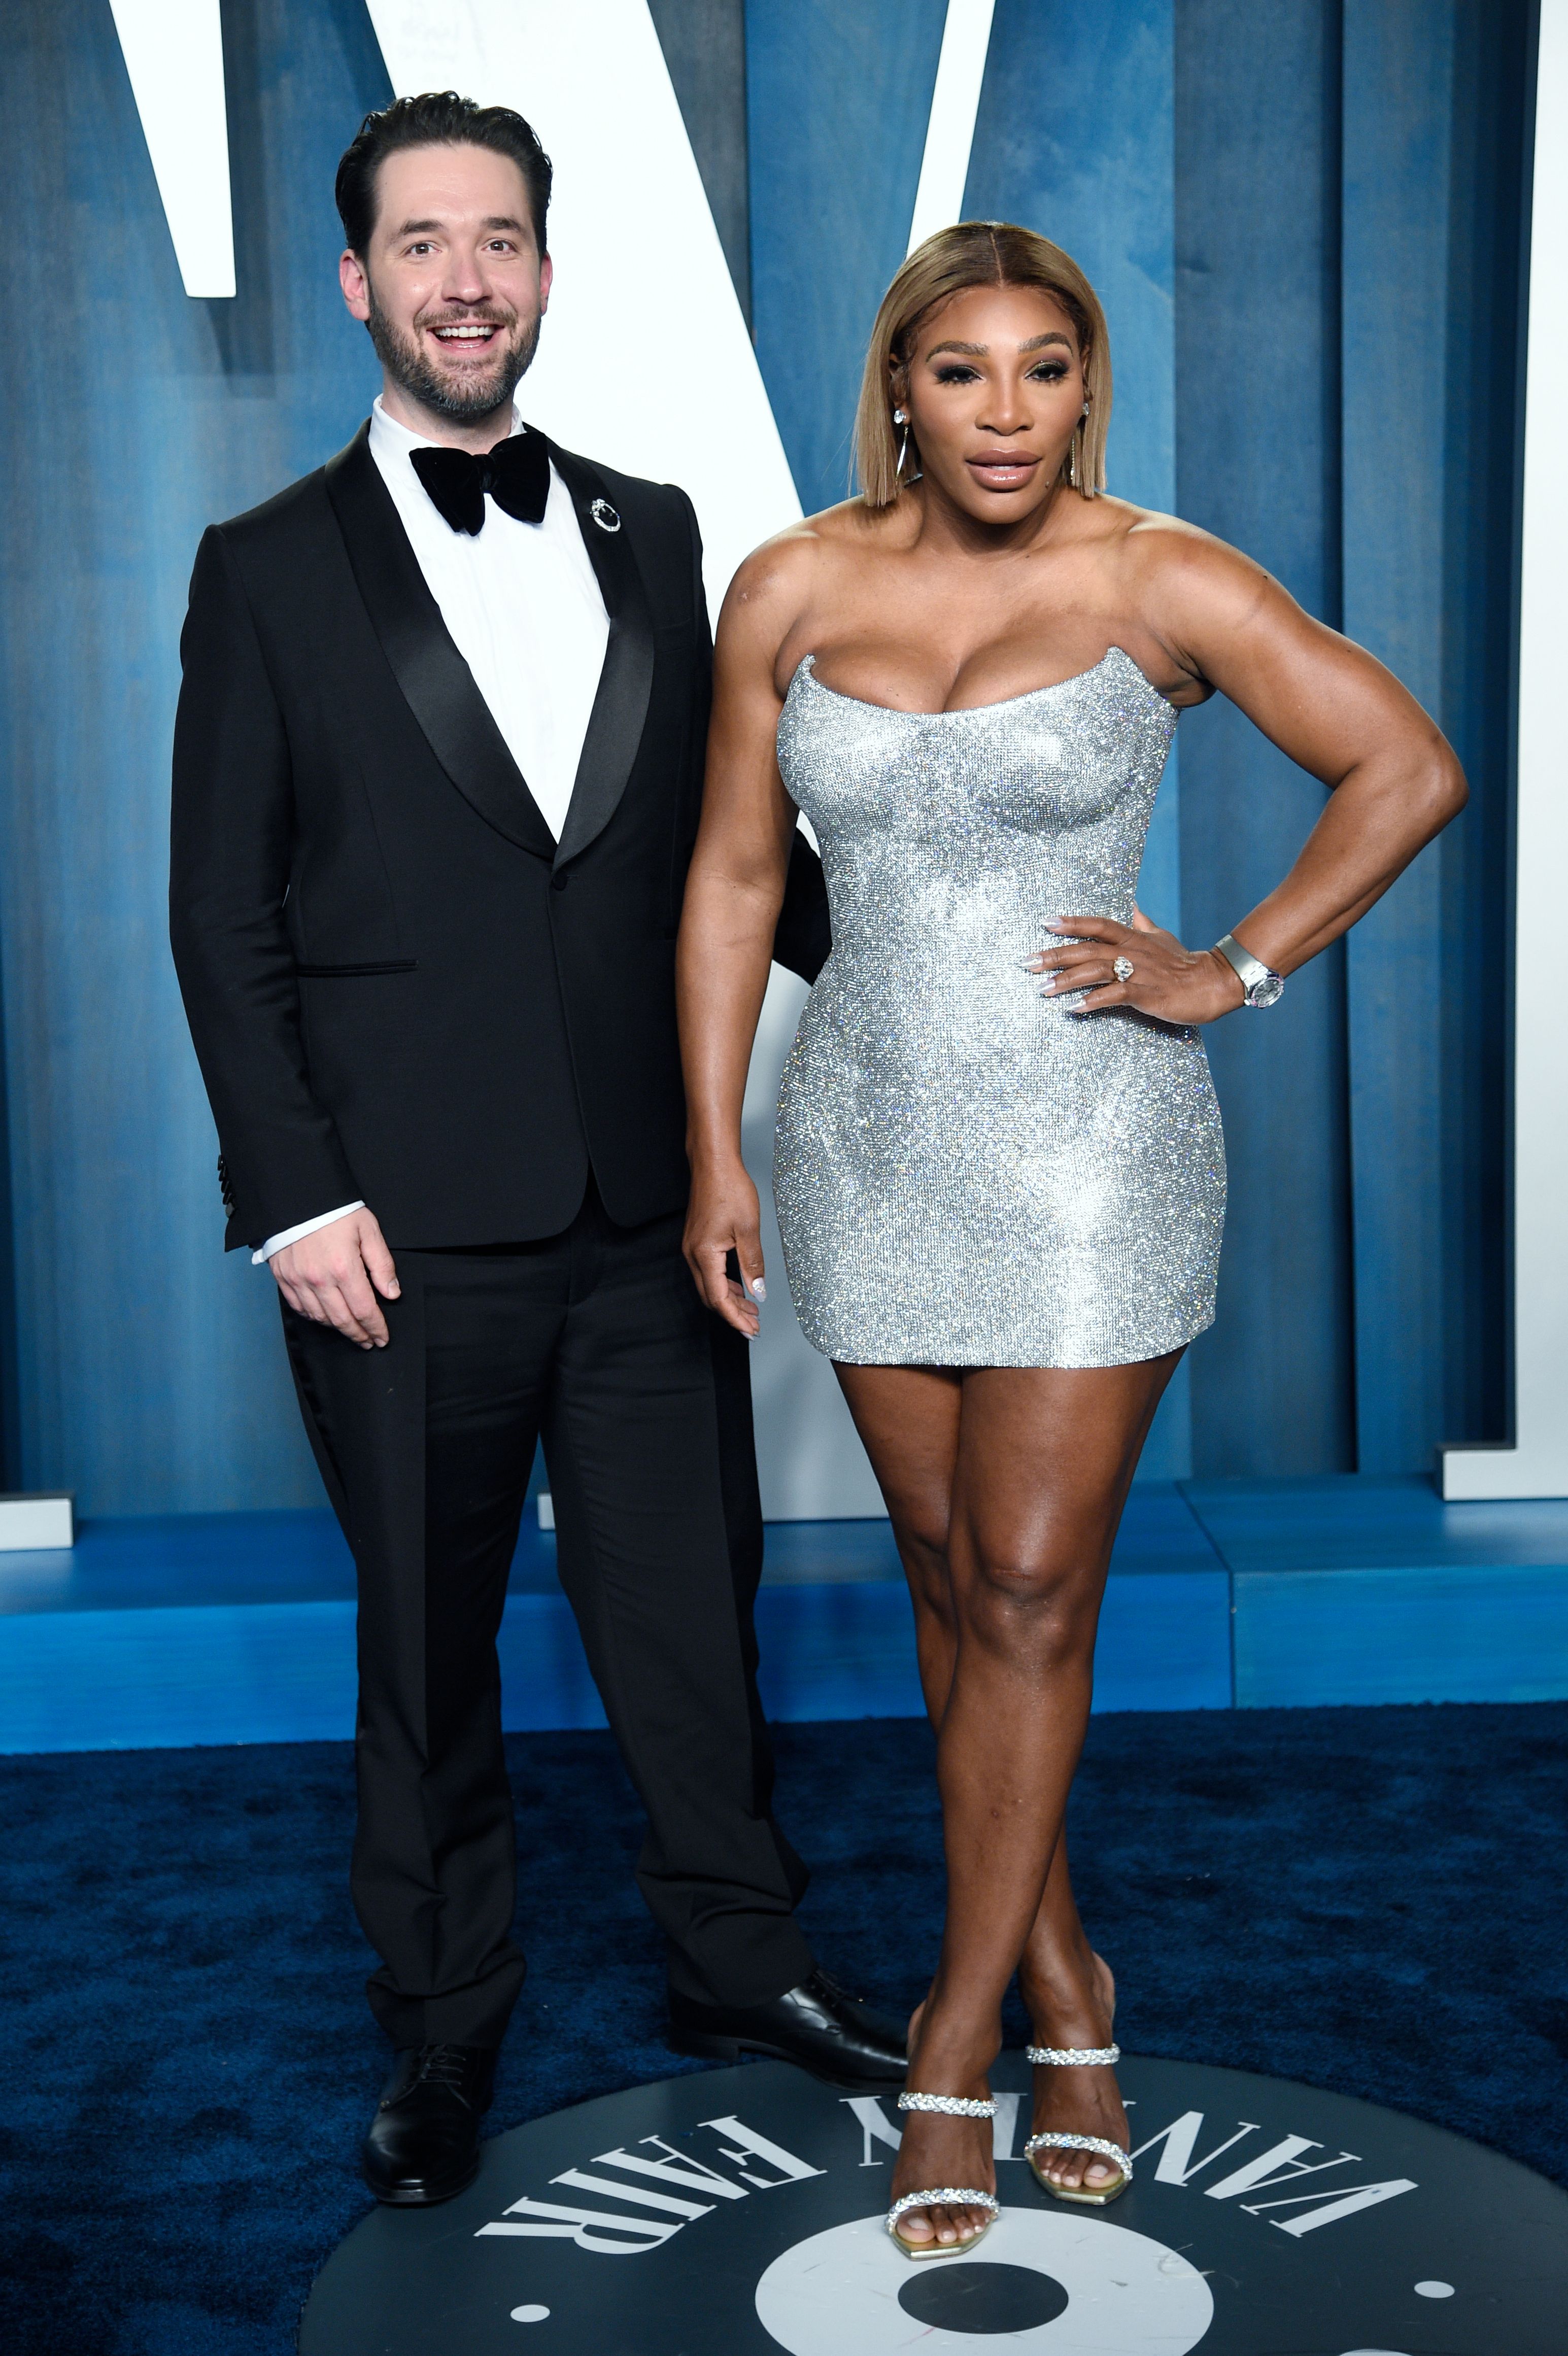 Alexis Ohanian Net Worth Revealed After Serena Williams Wedding